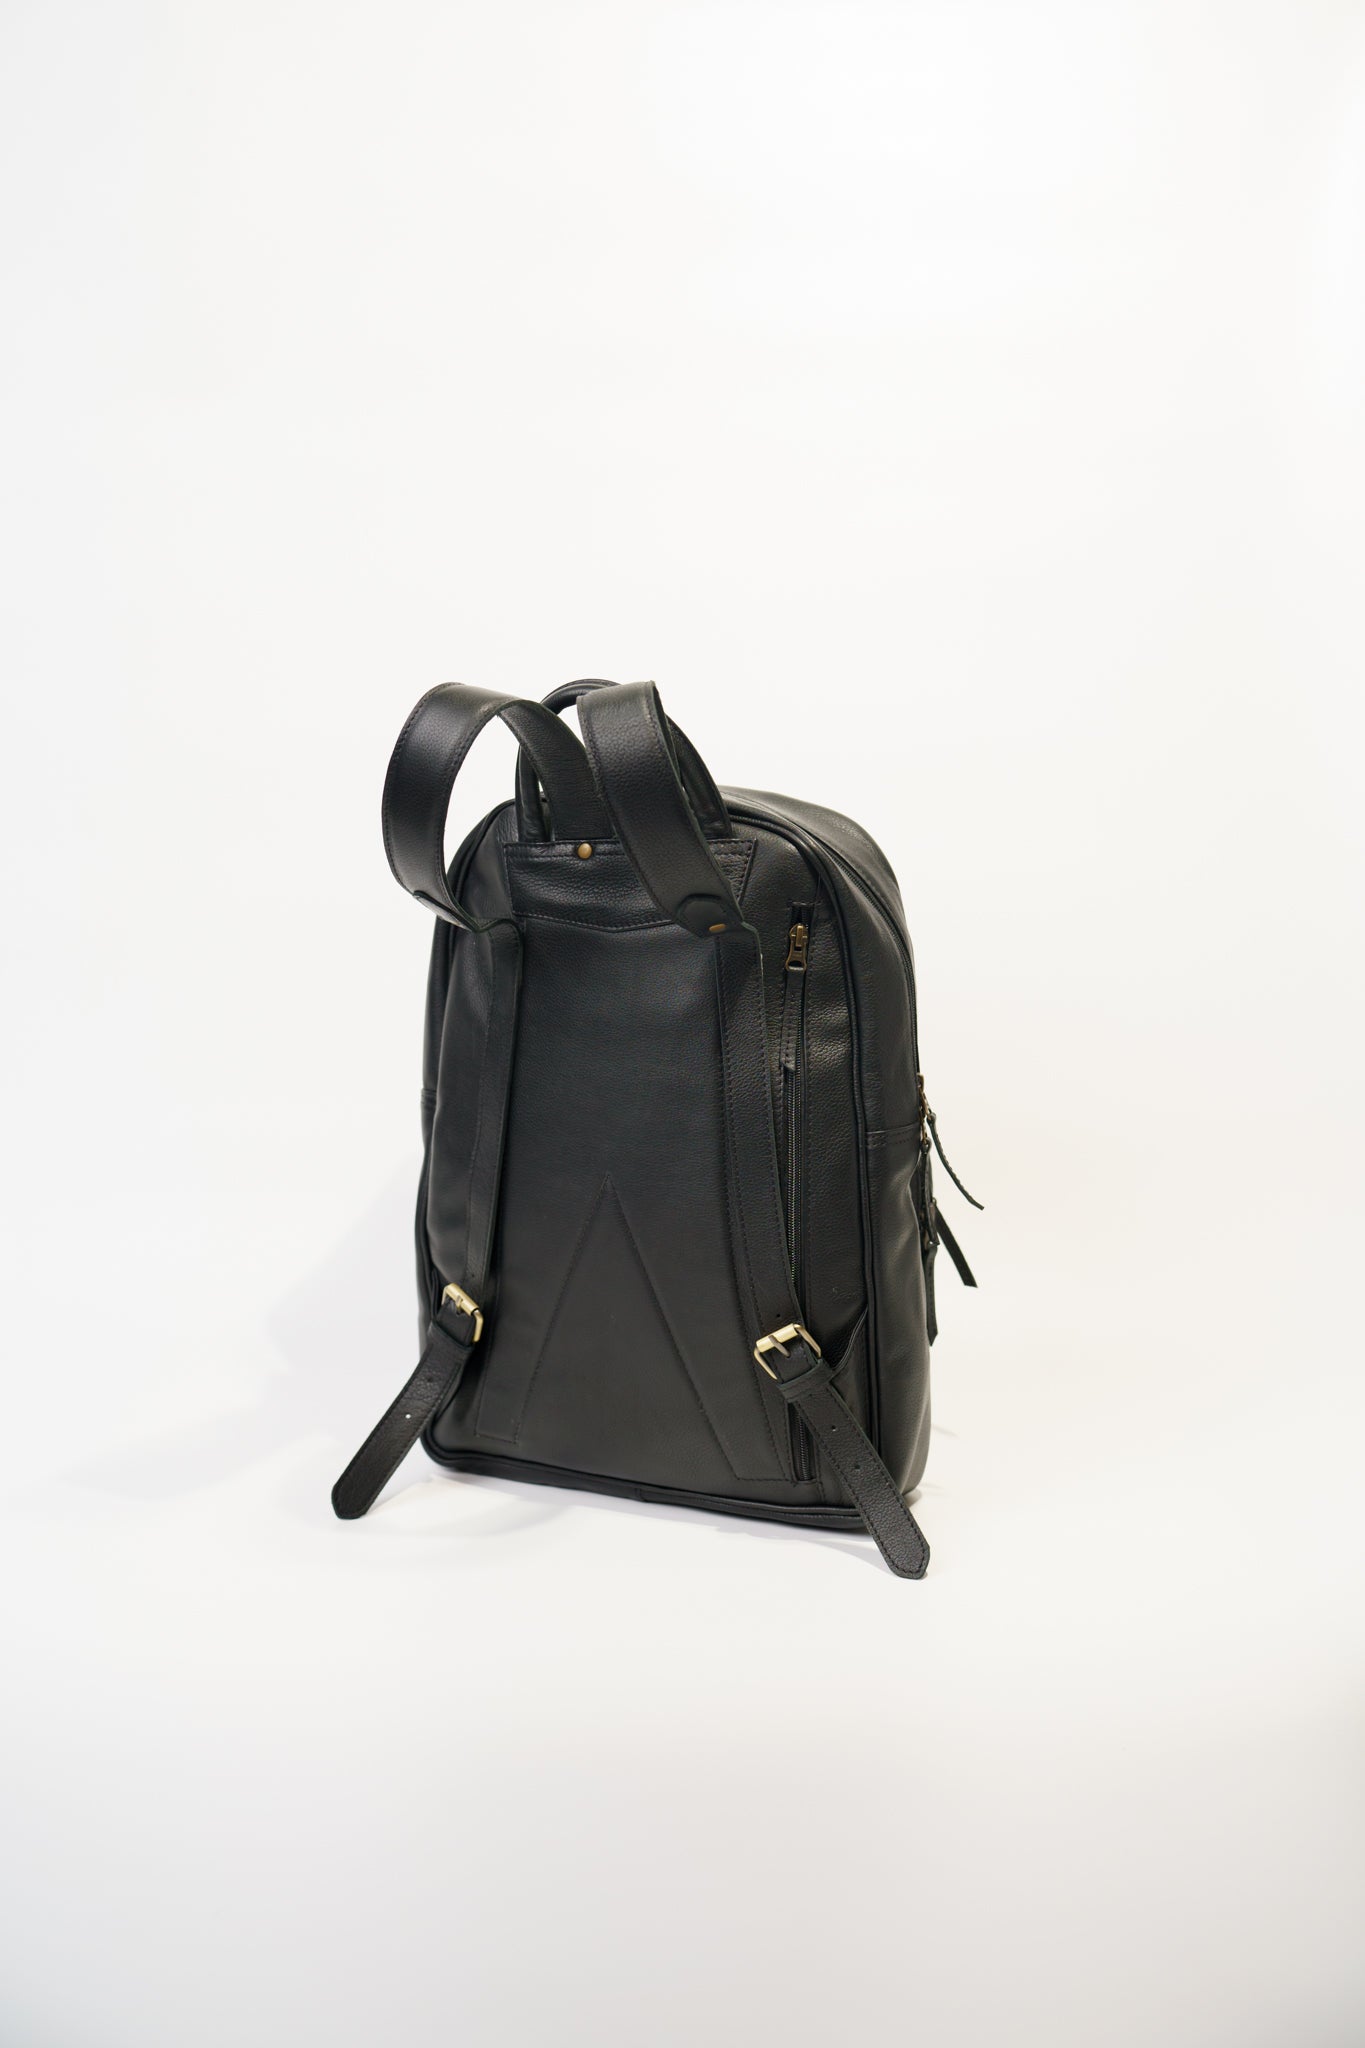 Rear view of Chamra's black leather bag showcasing adjustable shoulder straps with metal buckles.